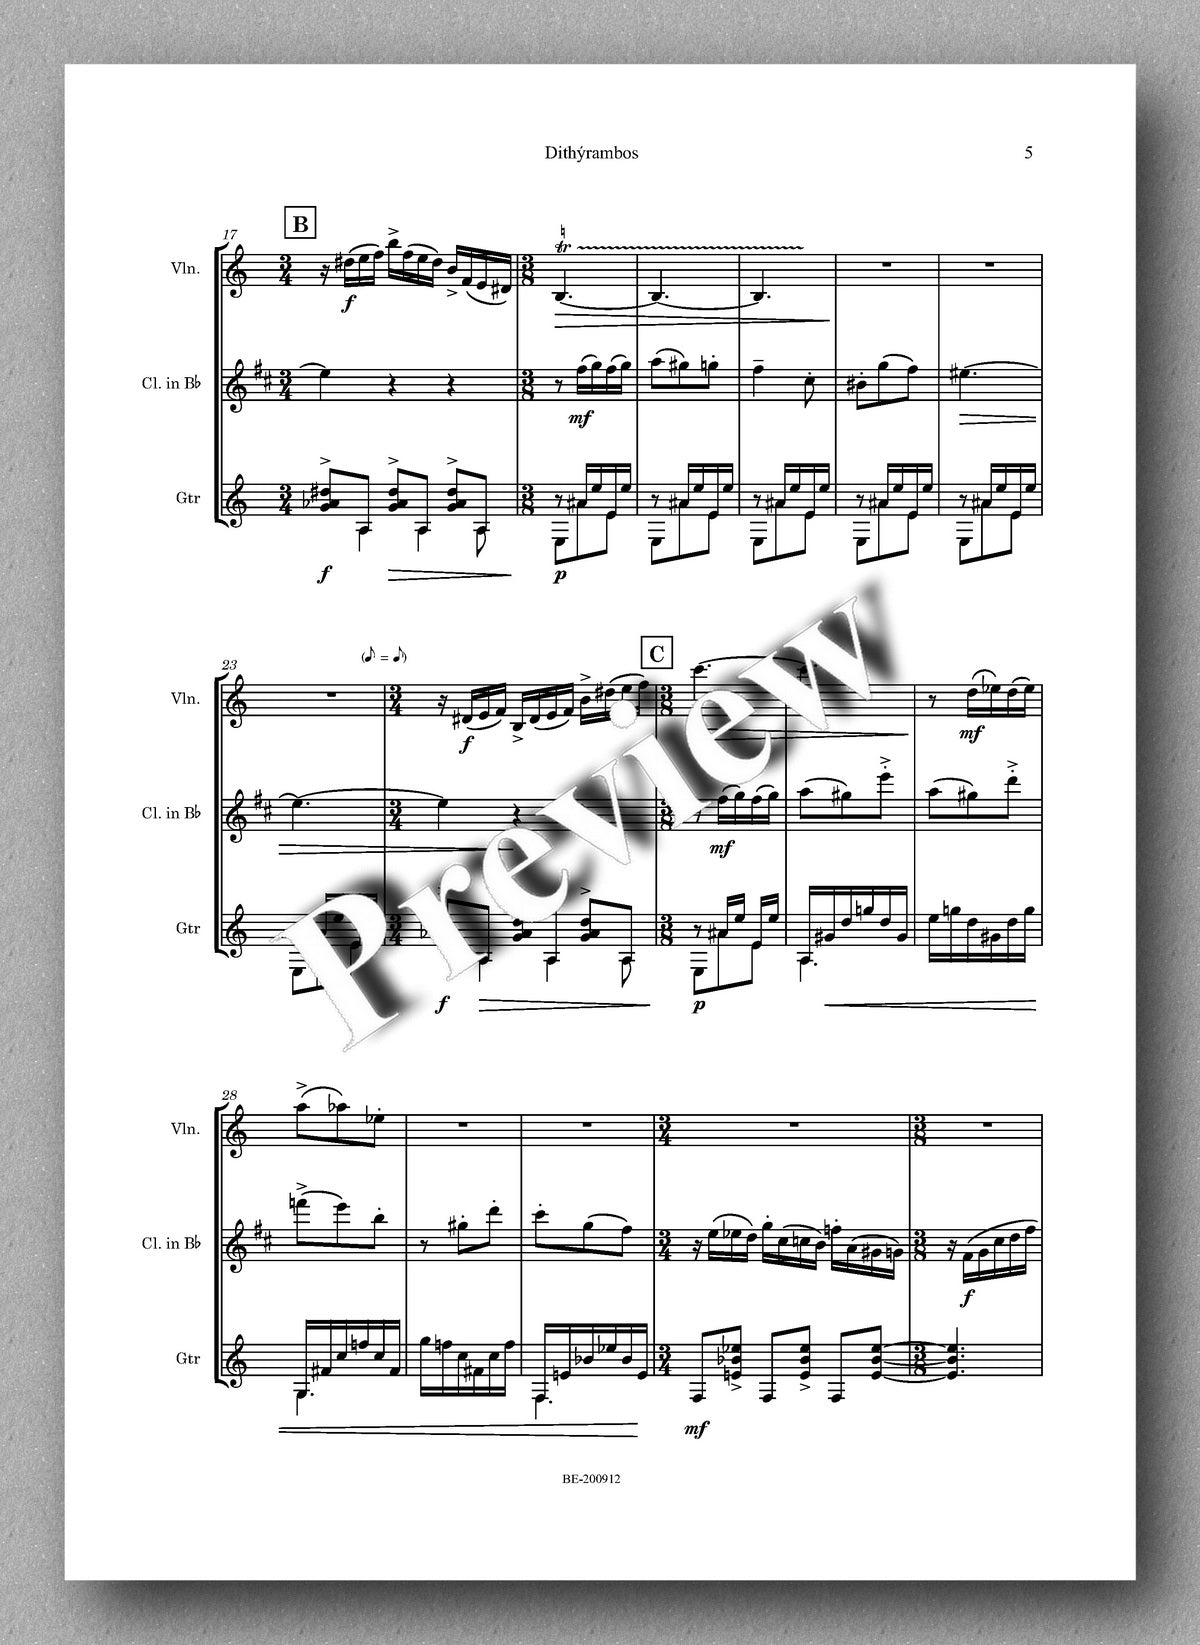 DITHÝRAMBOS  for violin, clarinet in Bb, and guitar by Roberto Rubio - preview of the full score 2